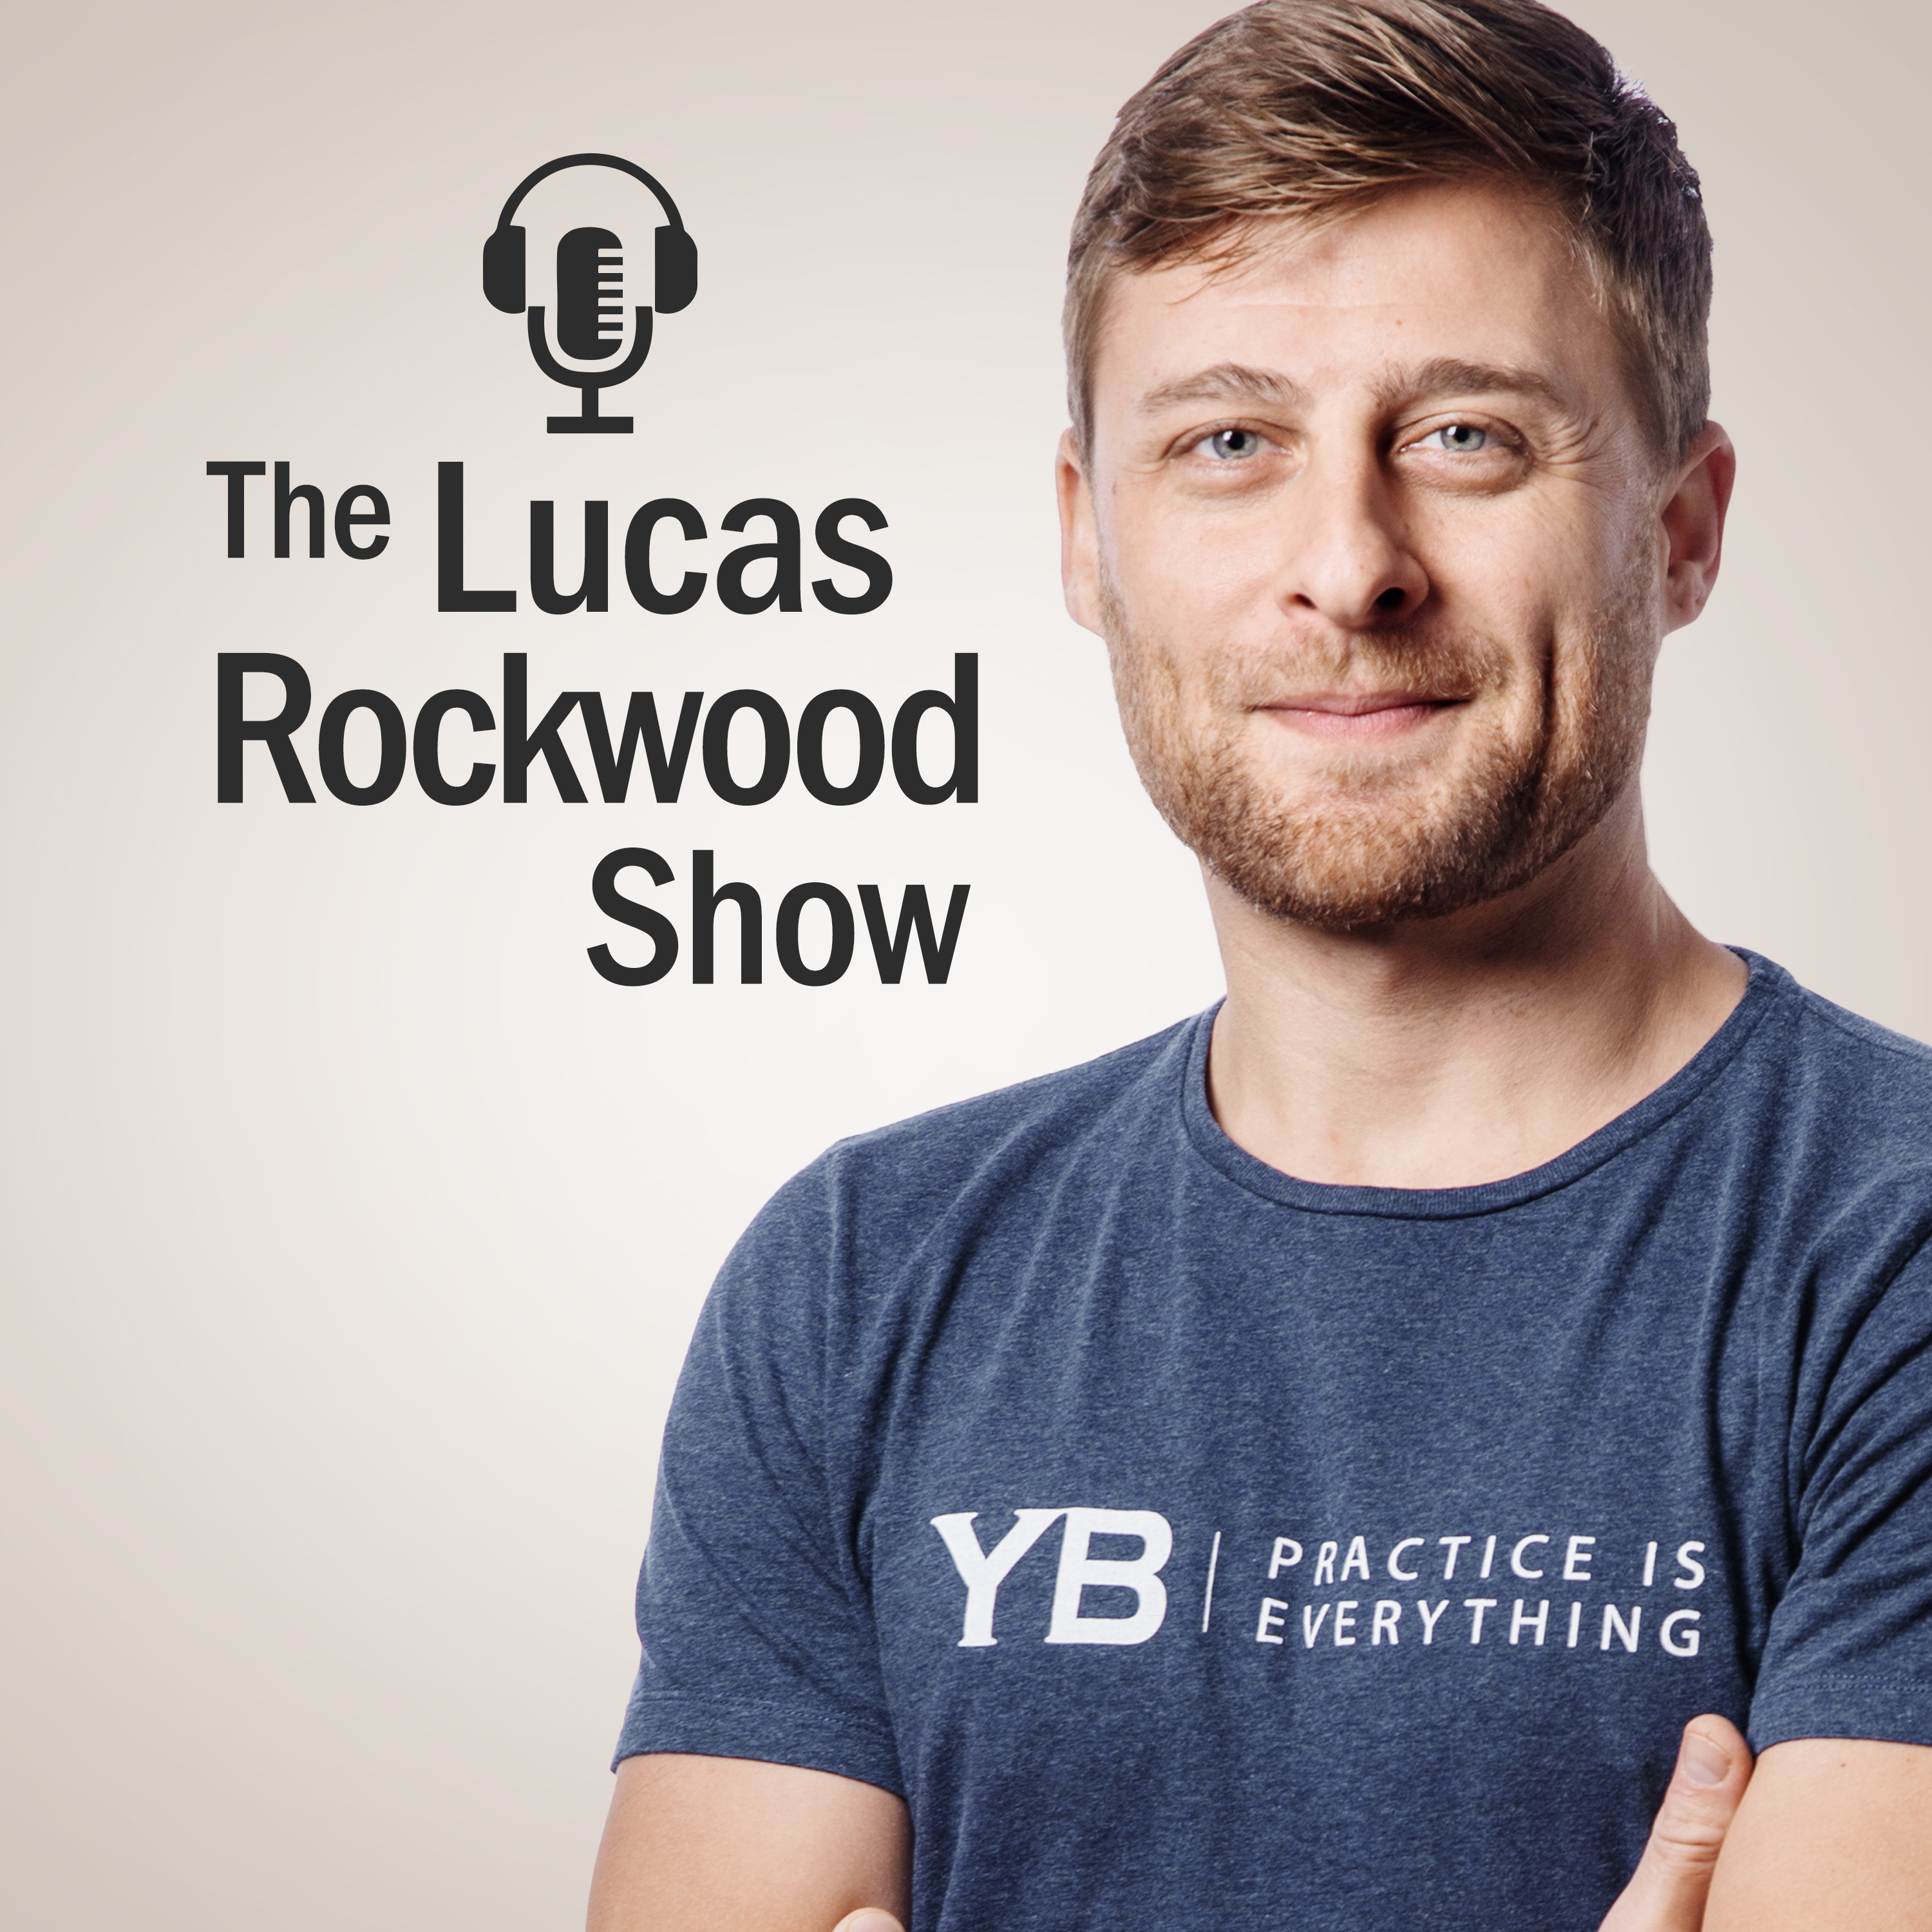 The Lucas Rockwood Show podcast